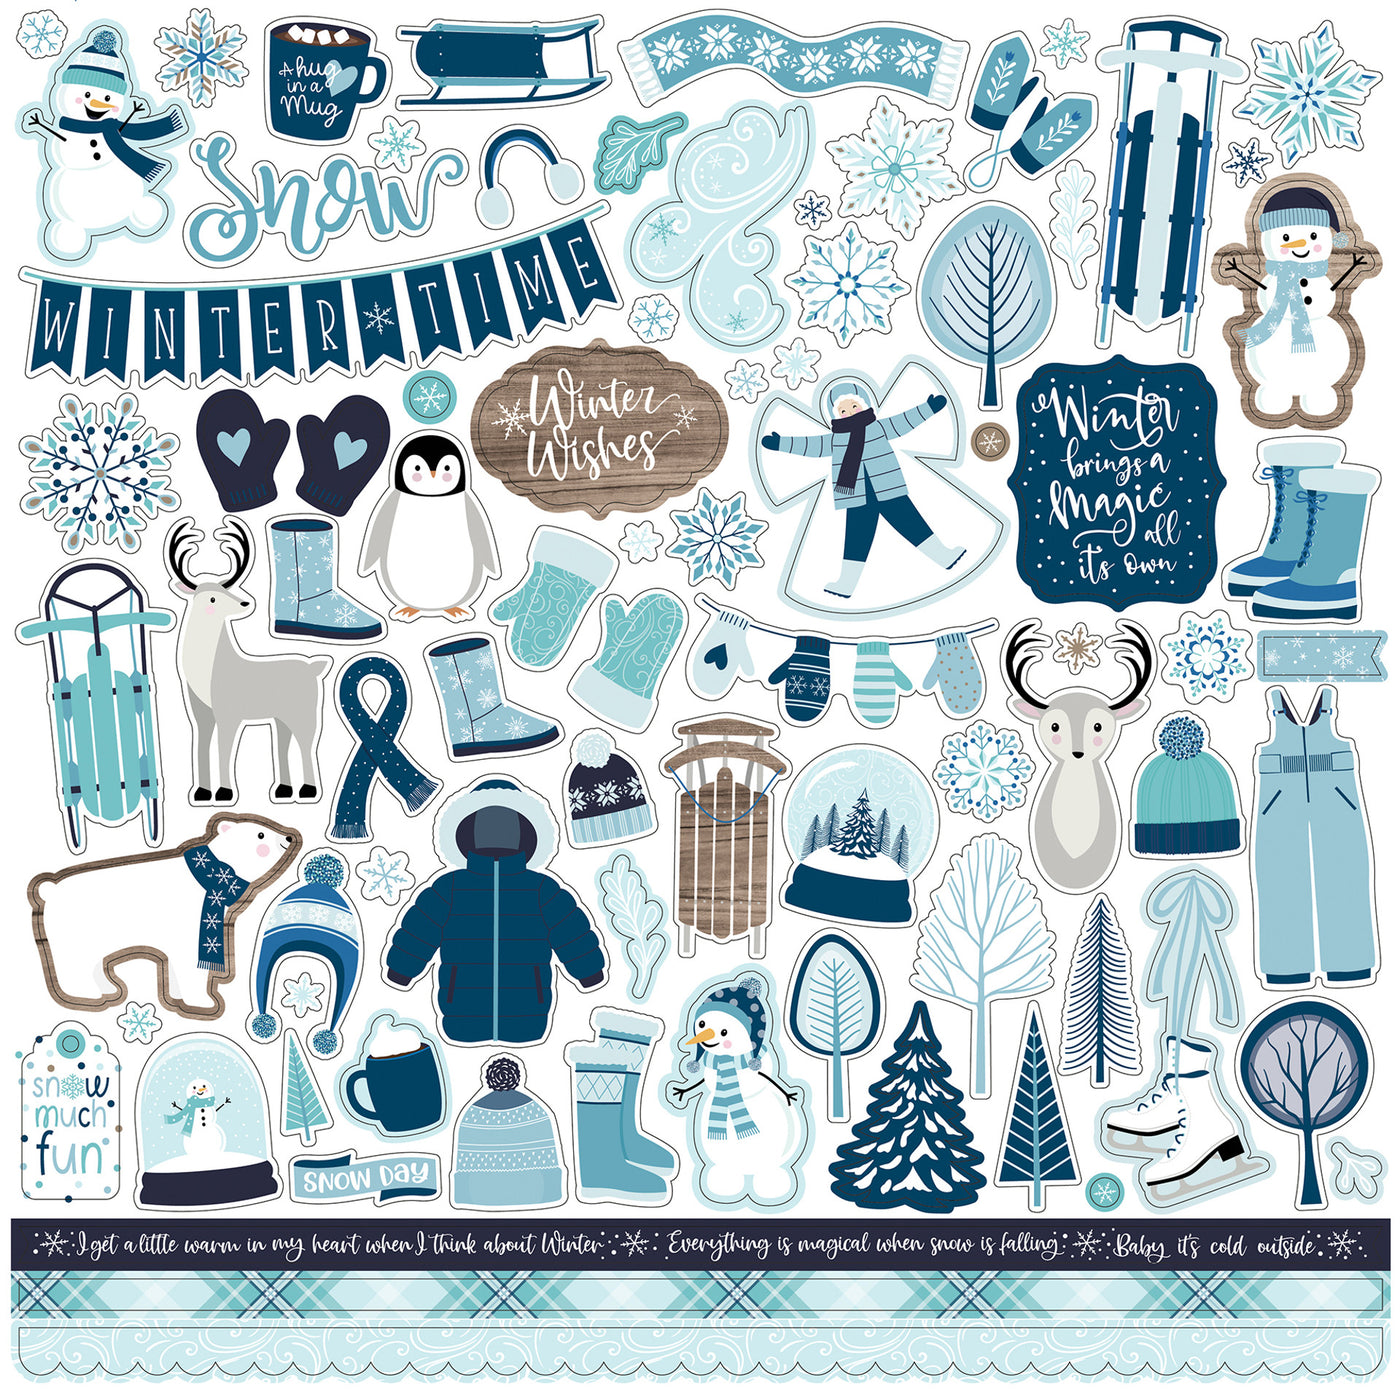 Winter Magic Elements 12" x 12" Cardstock Stickers from the Winter Magic Collection by Echo Park. These stickers include snowmen, penguins, snowflakes, winter clothes, phrases, banners, and more!